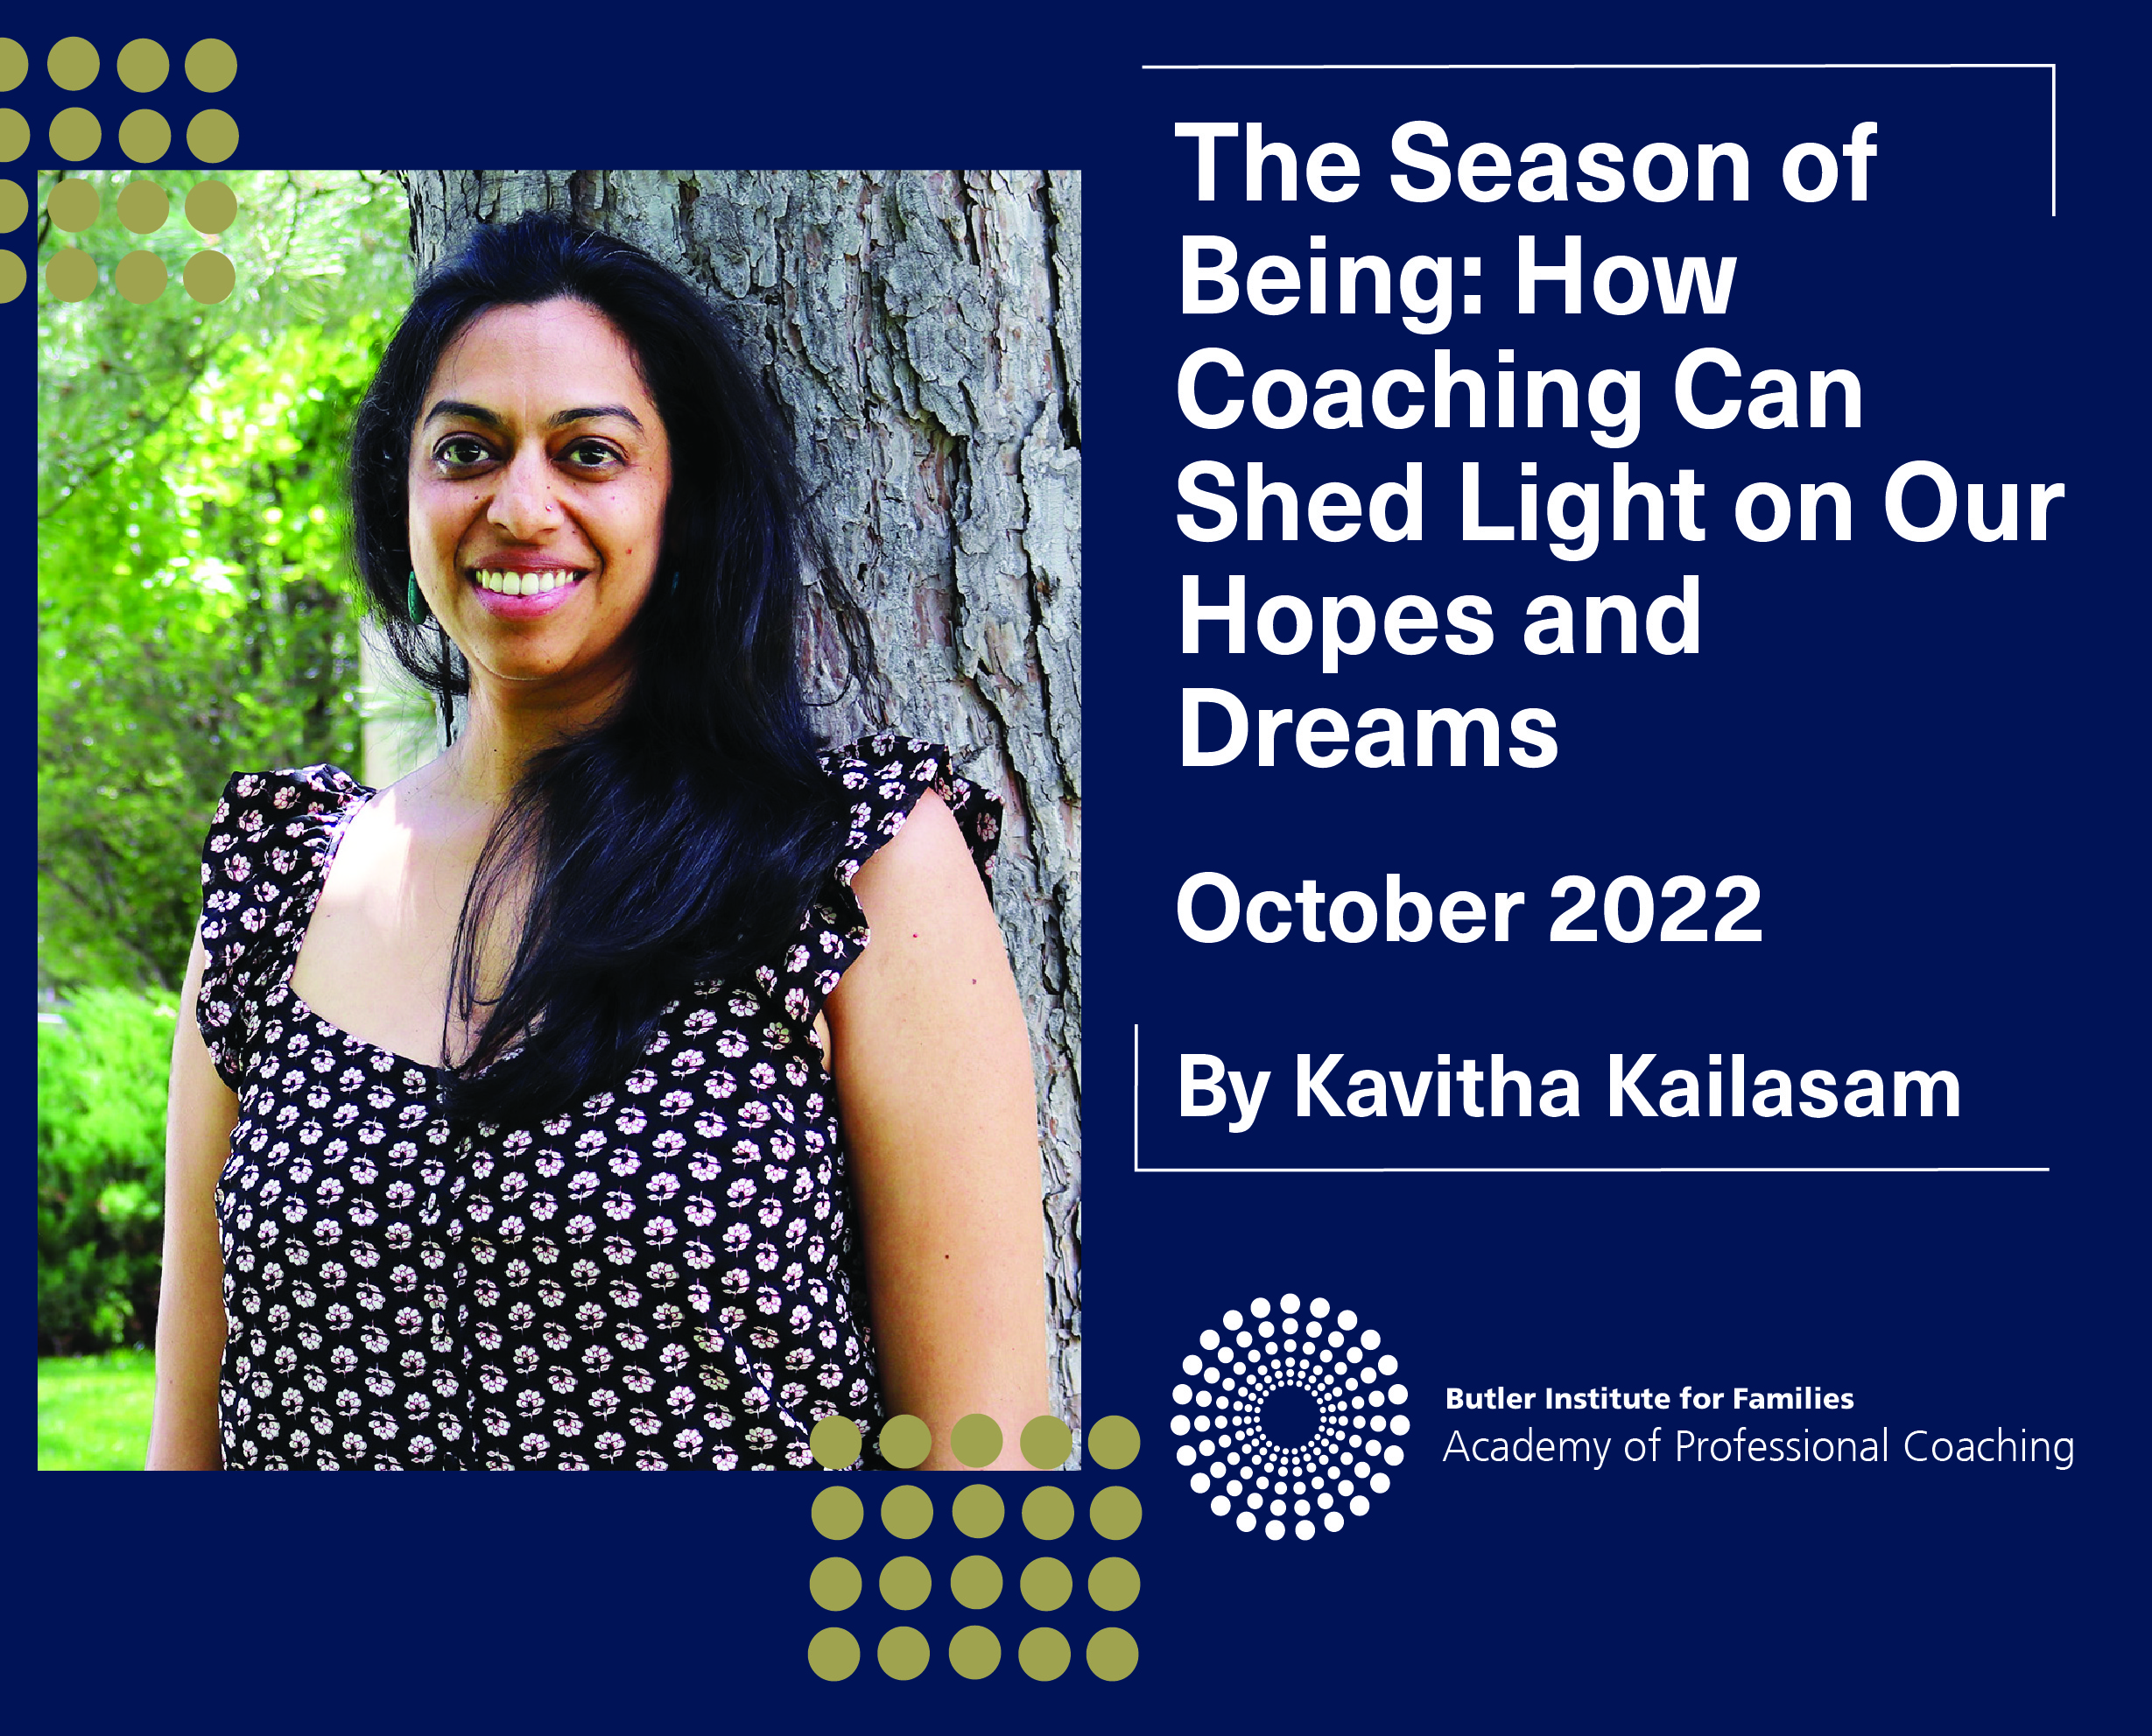 The Season of Being: How Coaching Can Shed Light on Our Hopes and Dreams quote